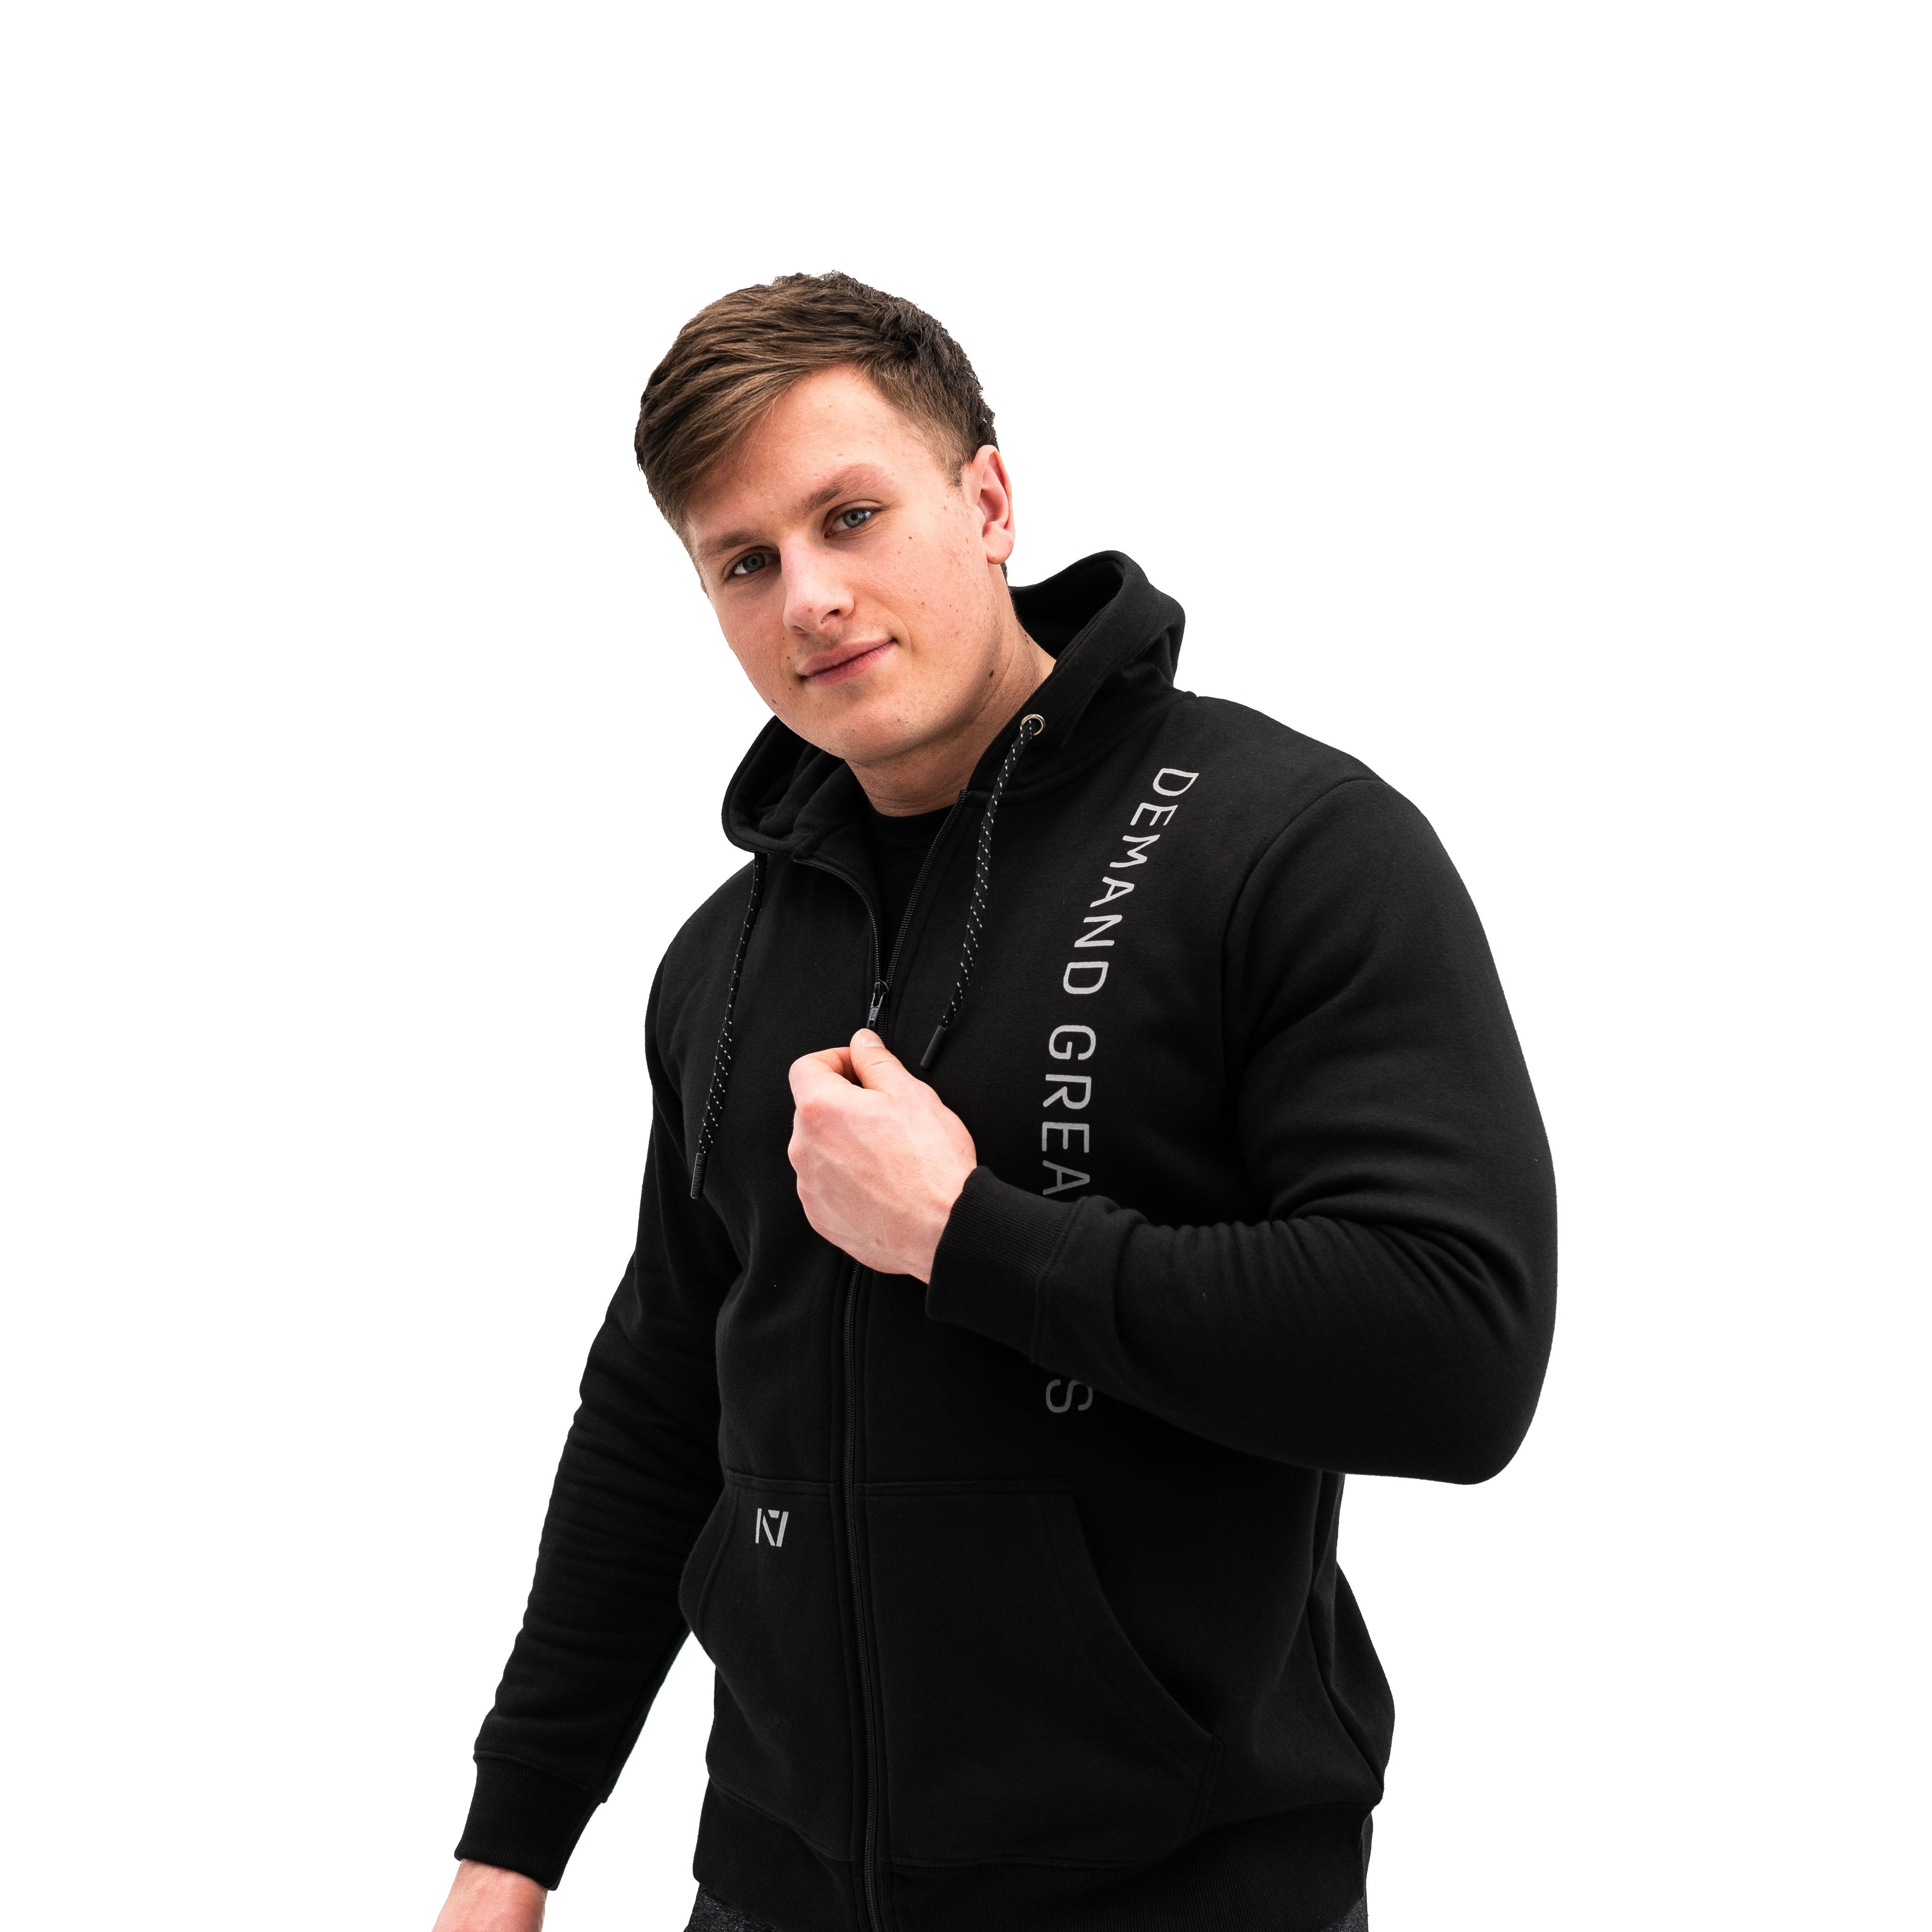 Go Far is a zip up hoodie great for casual wear or lifting in the gym. Purchase Go Far zip up hoodie in UK and Europe from A7 UK. A7 have the best Bar Grip Tshirts, shipping to UK and Europe from A7 UK. Go Far is our newest design on our zip up hoodie. Demand Greatness on the front with an eagle on the back, in a chromium colourway! A7UK supplies the best Powerlifting apparel for all your workouts. Available in UK and Europe including France, Italy, Germany, the Netherlands, Sweden and Poland.